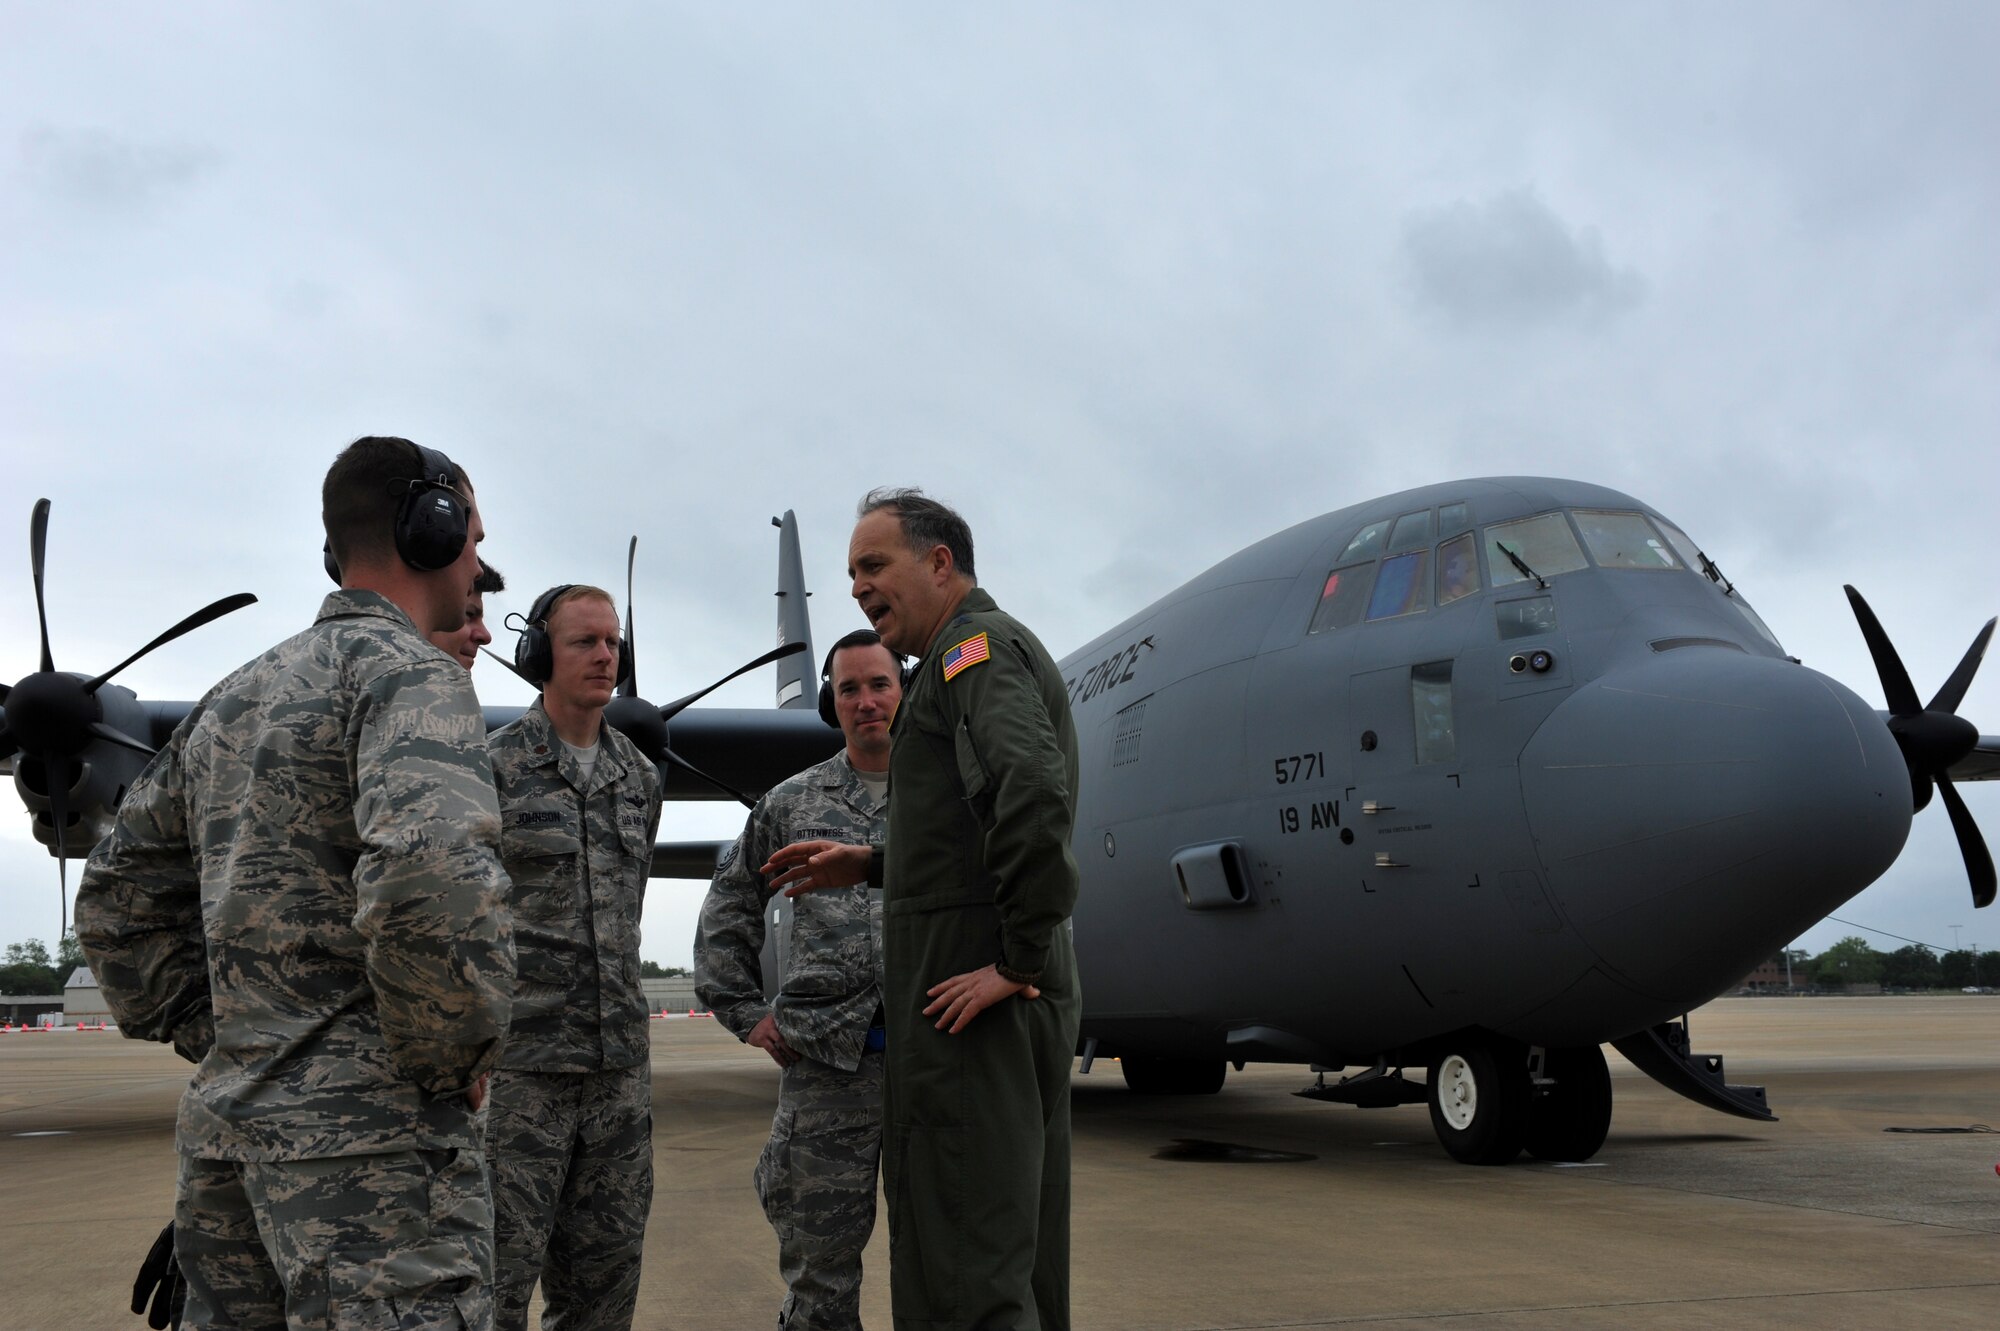 U.S. Air Force Maj. Gen. Jerry Martinez, Air Mobility Command Director of Operations, discuss the importance on leadership in a deployed location with the 621st Contingency Response Support Squadron commander and his staff, April 18, 2016, at Fort Polk, La., during Green Flag 16-06.  The Royal Australian Air Force, Royal New Zealand Air Force and U.S. Air Force train during Green Flag Little Rock to ensure all aircrew can effectively communicate. (U.S. Air Force photo by Staff Sgt. Jeremy McGuffin)